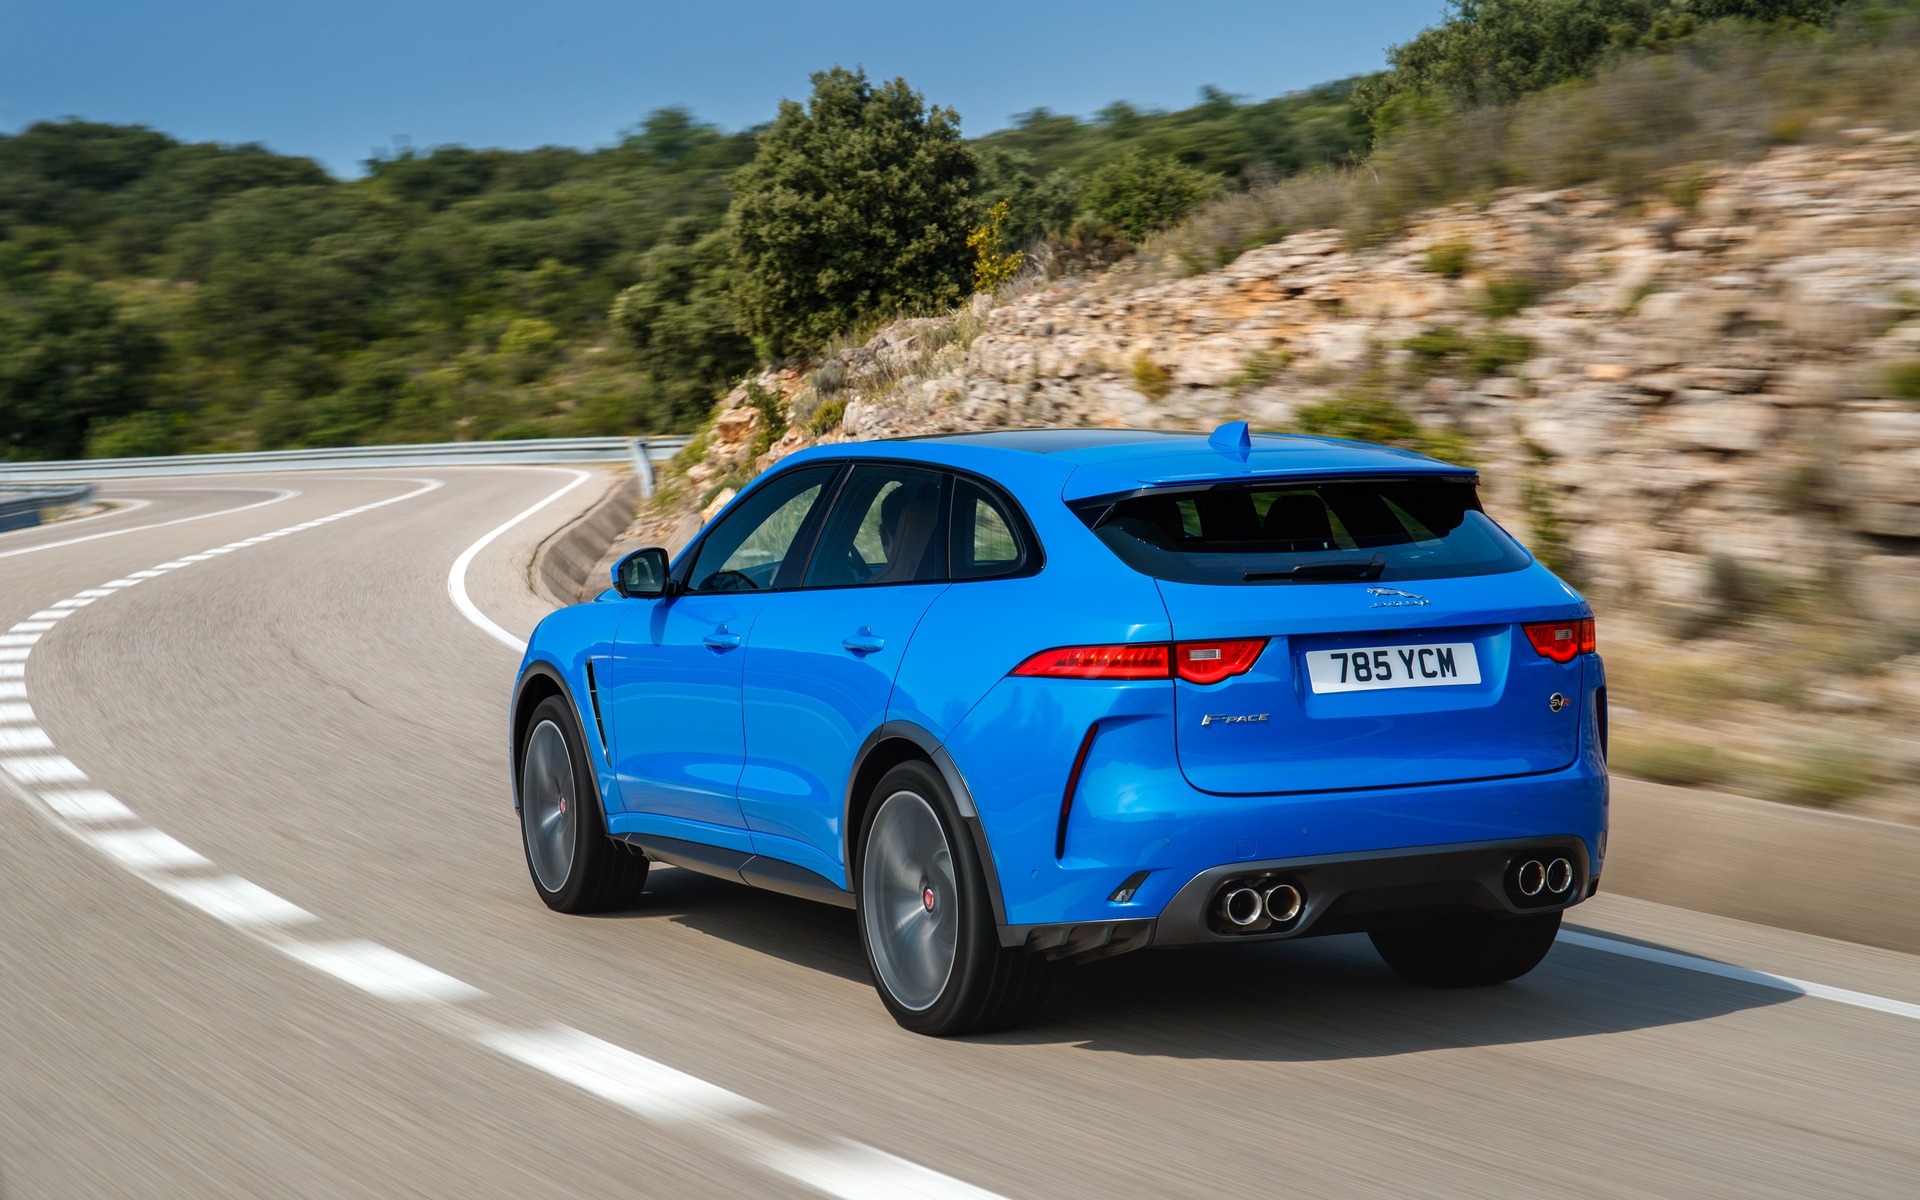 2020 Jaguar F-PACE SVR: The Heart of the F-TYPE SVR - The ...